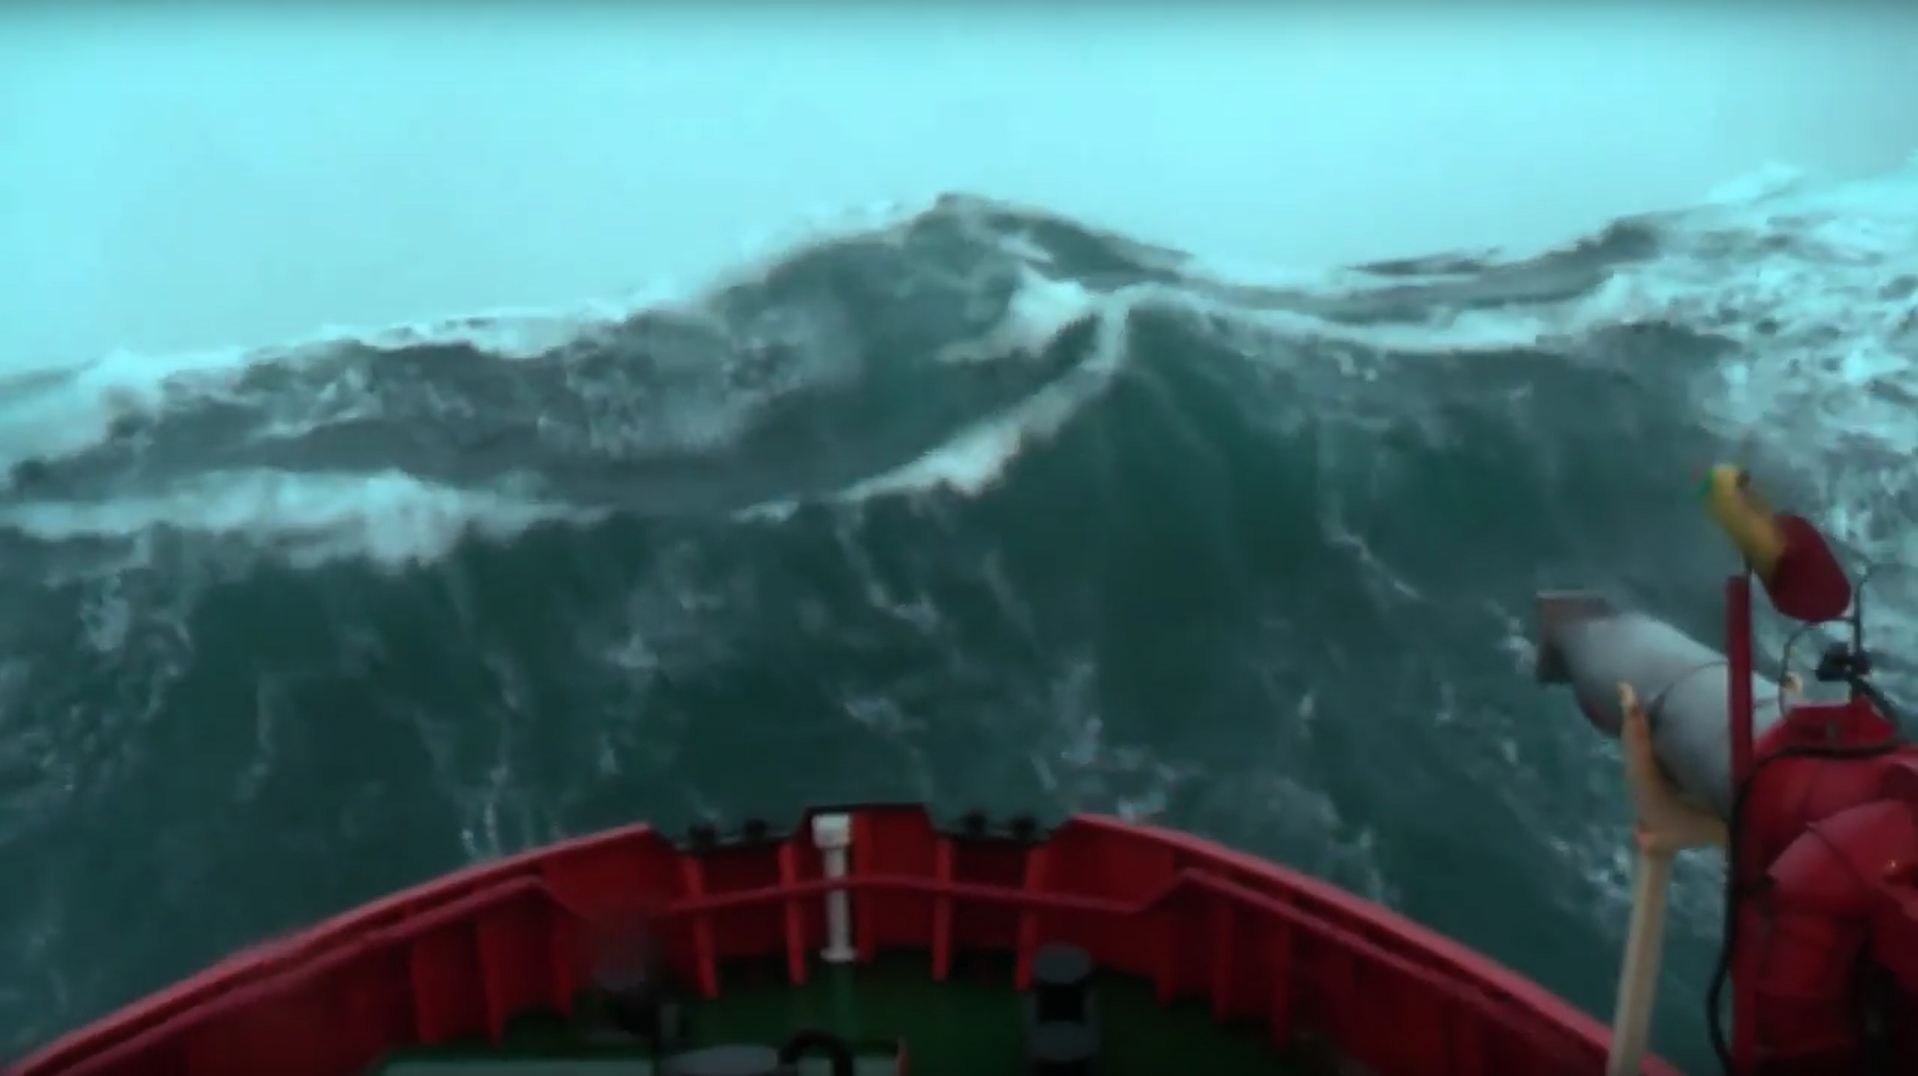 MIT Invents a Way To Warn Sailors of Rogue Waves